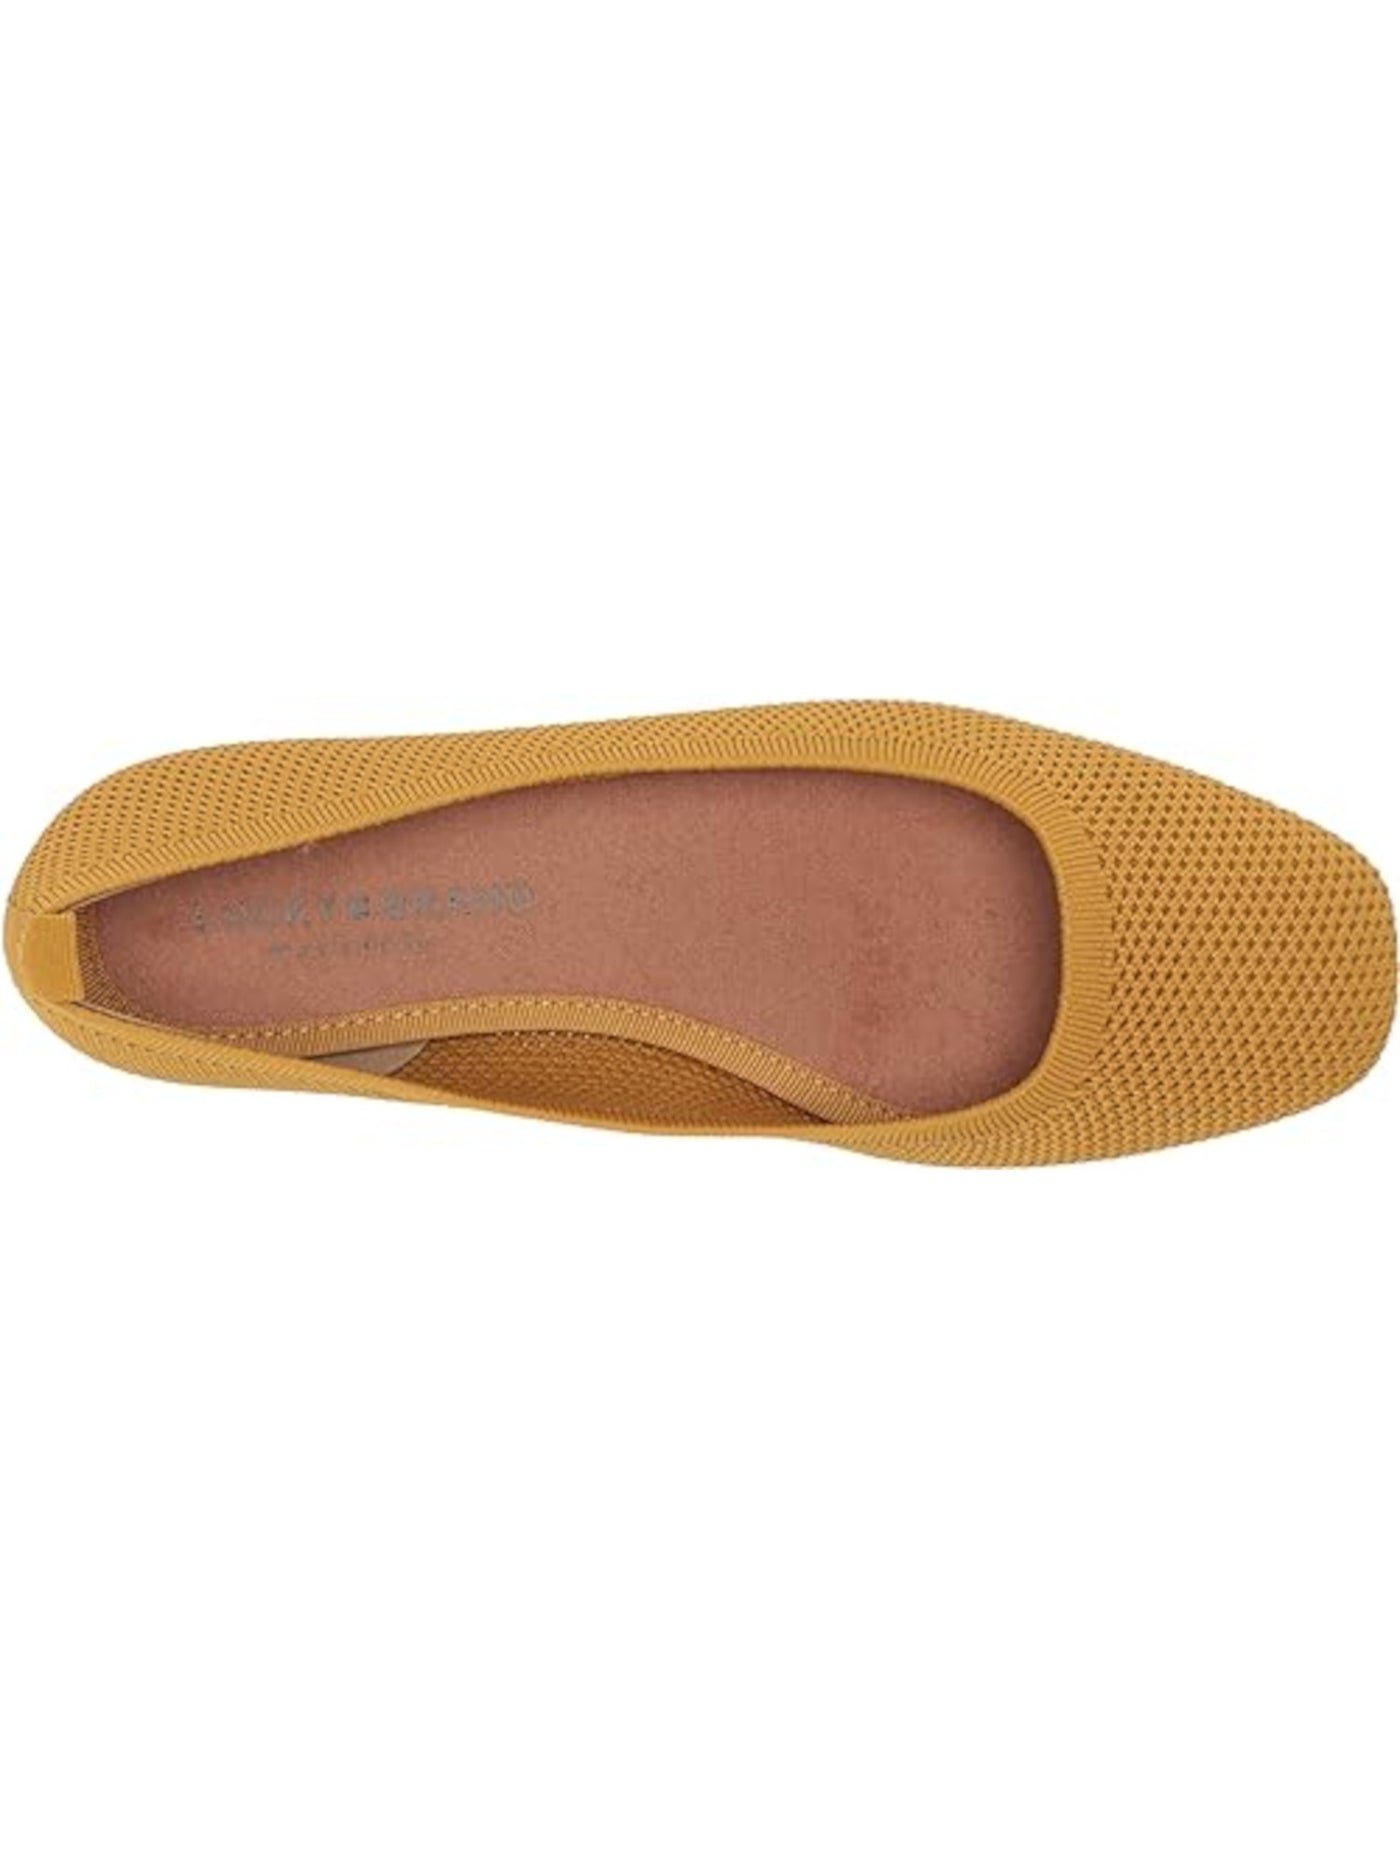 LUCKY BRAND Womens Gold Ribbed Knit Flexible Sole Includes Mesh Bag For Washing Cushioned Removable Insole Daneric Square Toe Slip On Flats Shoes 12 M